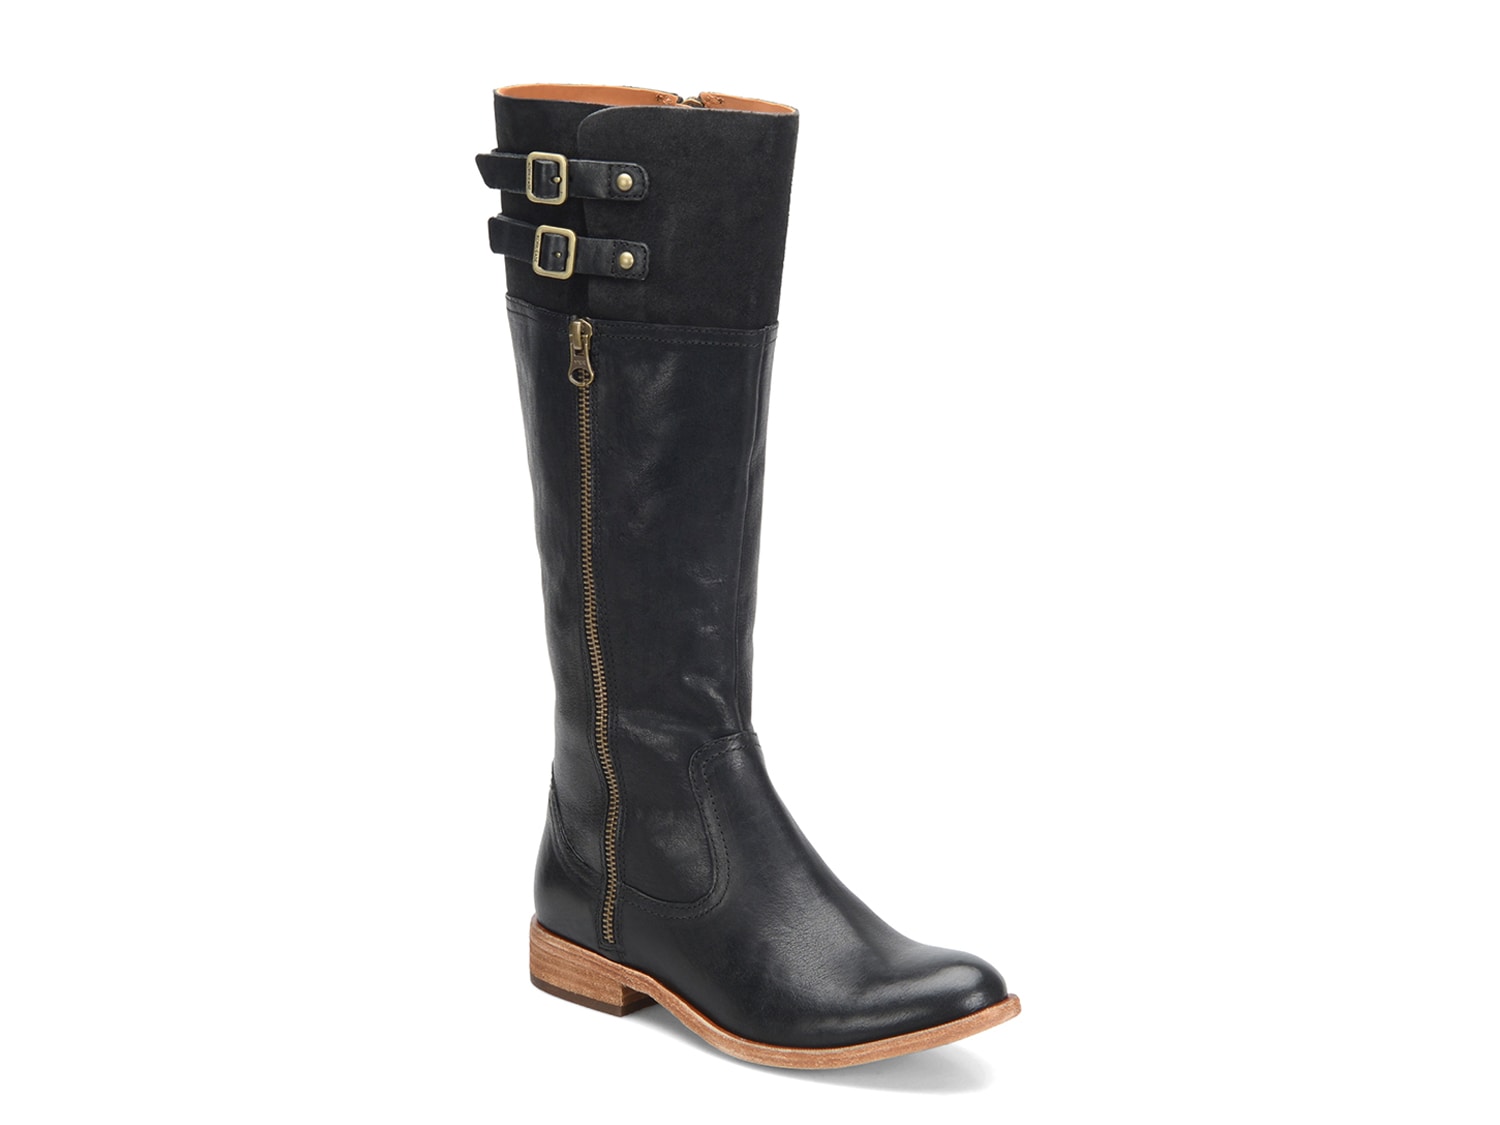 Kork-Ease Levin Riding Boot - Free Shipping | DSW